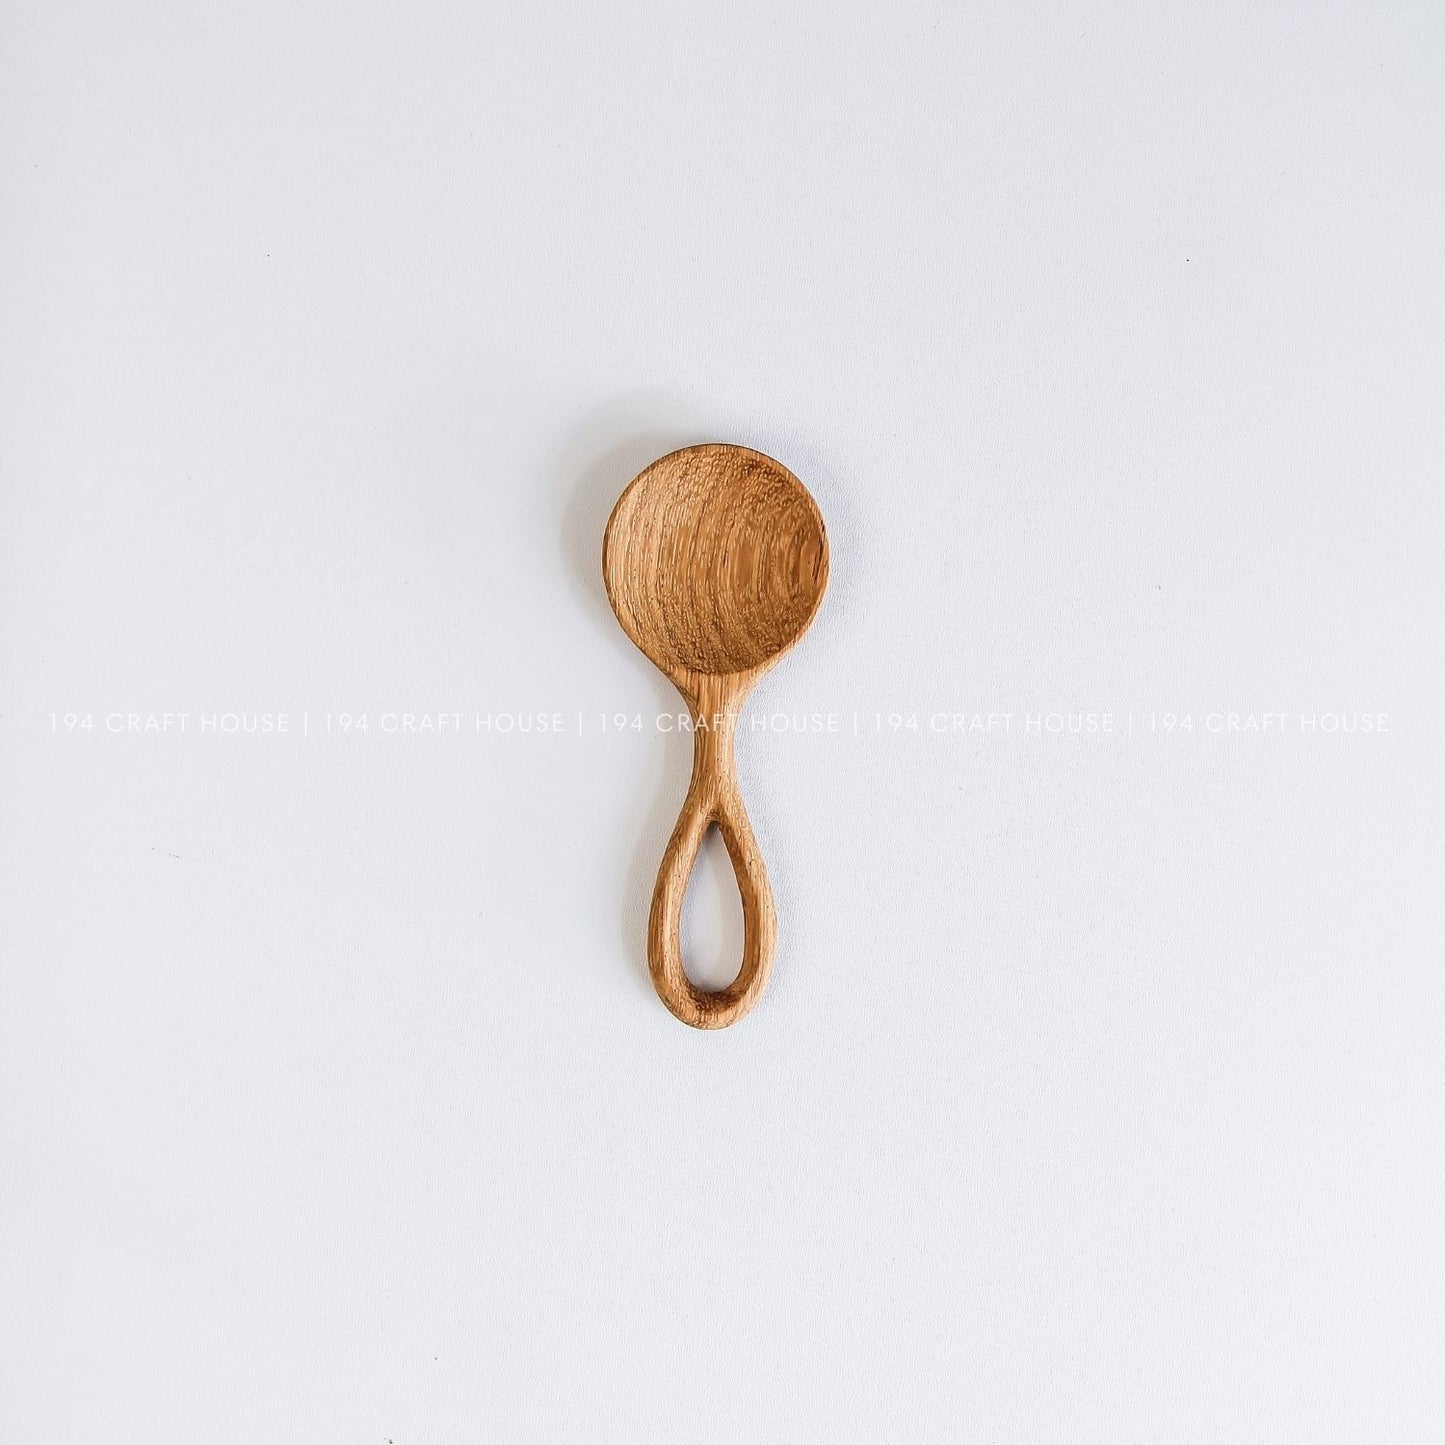 Handmade Small Wooden Spoon for Tea & Coffee Scoops